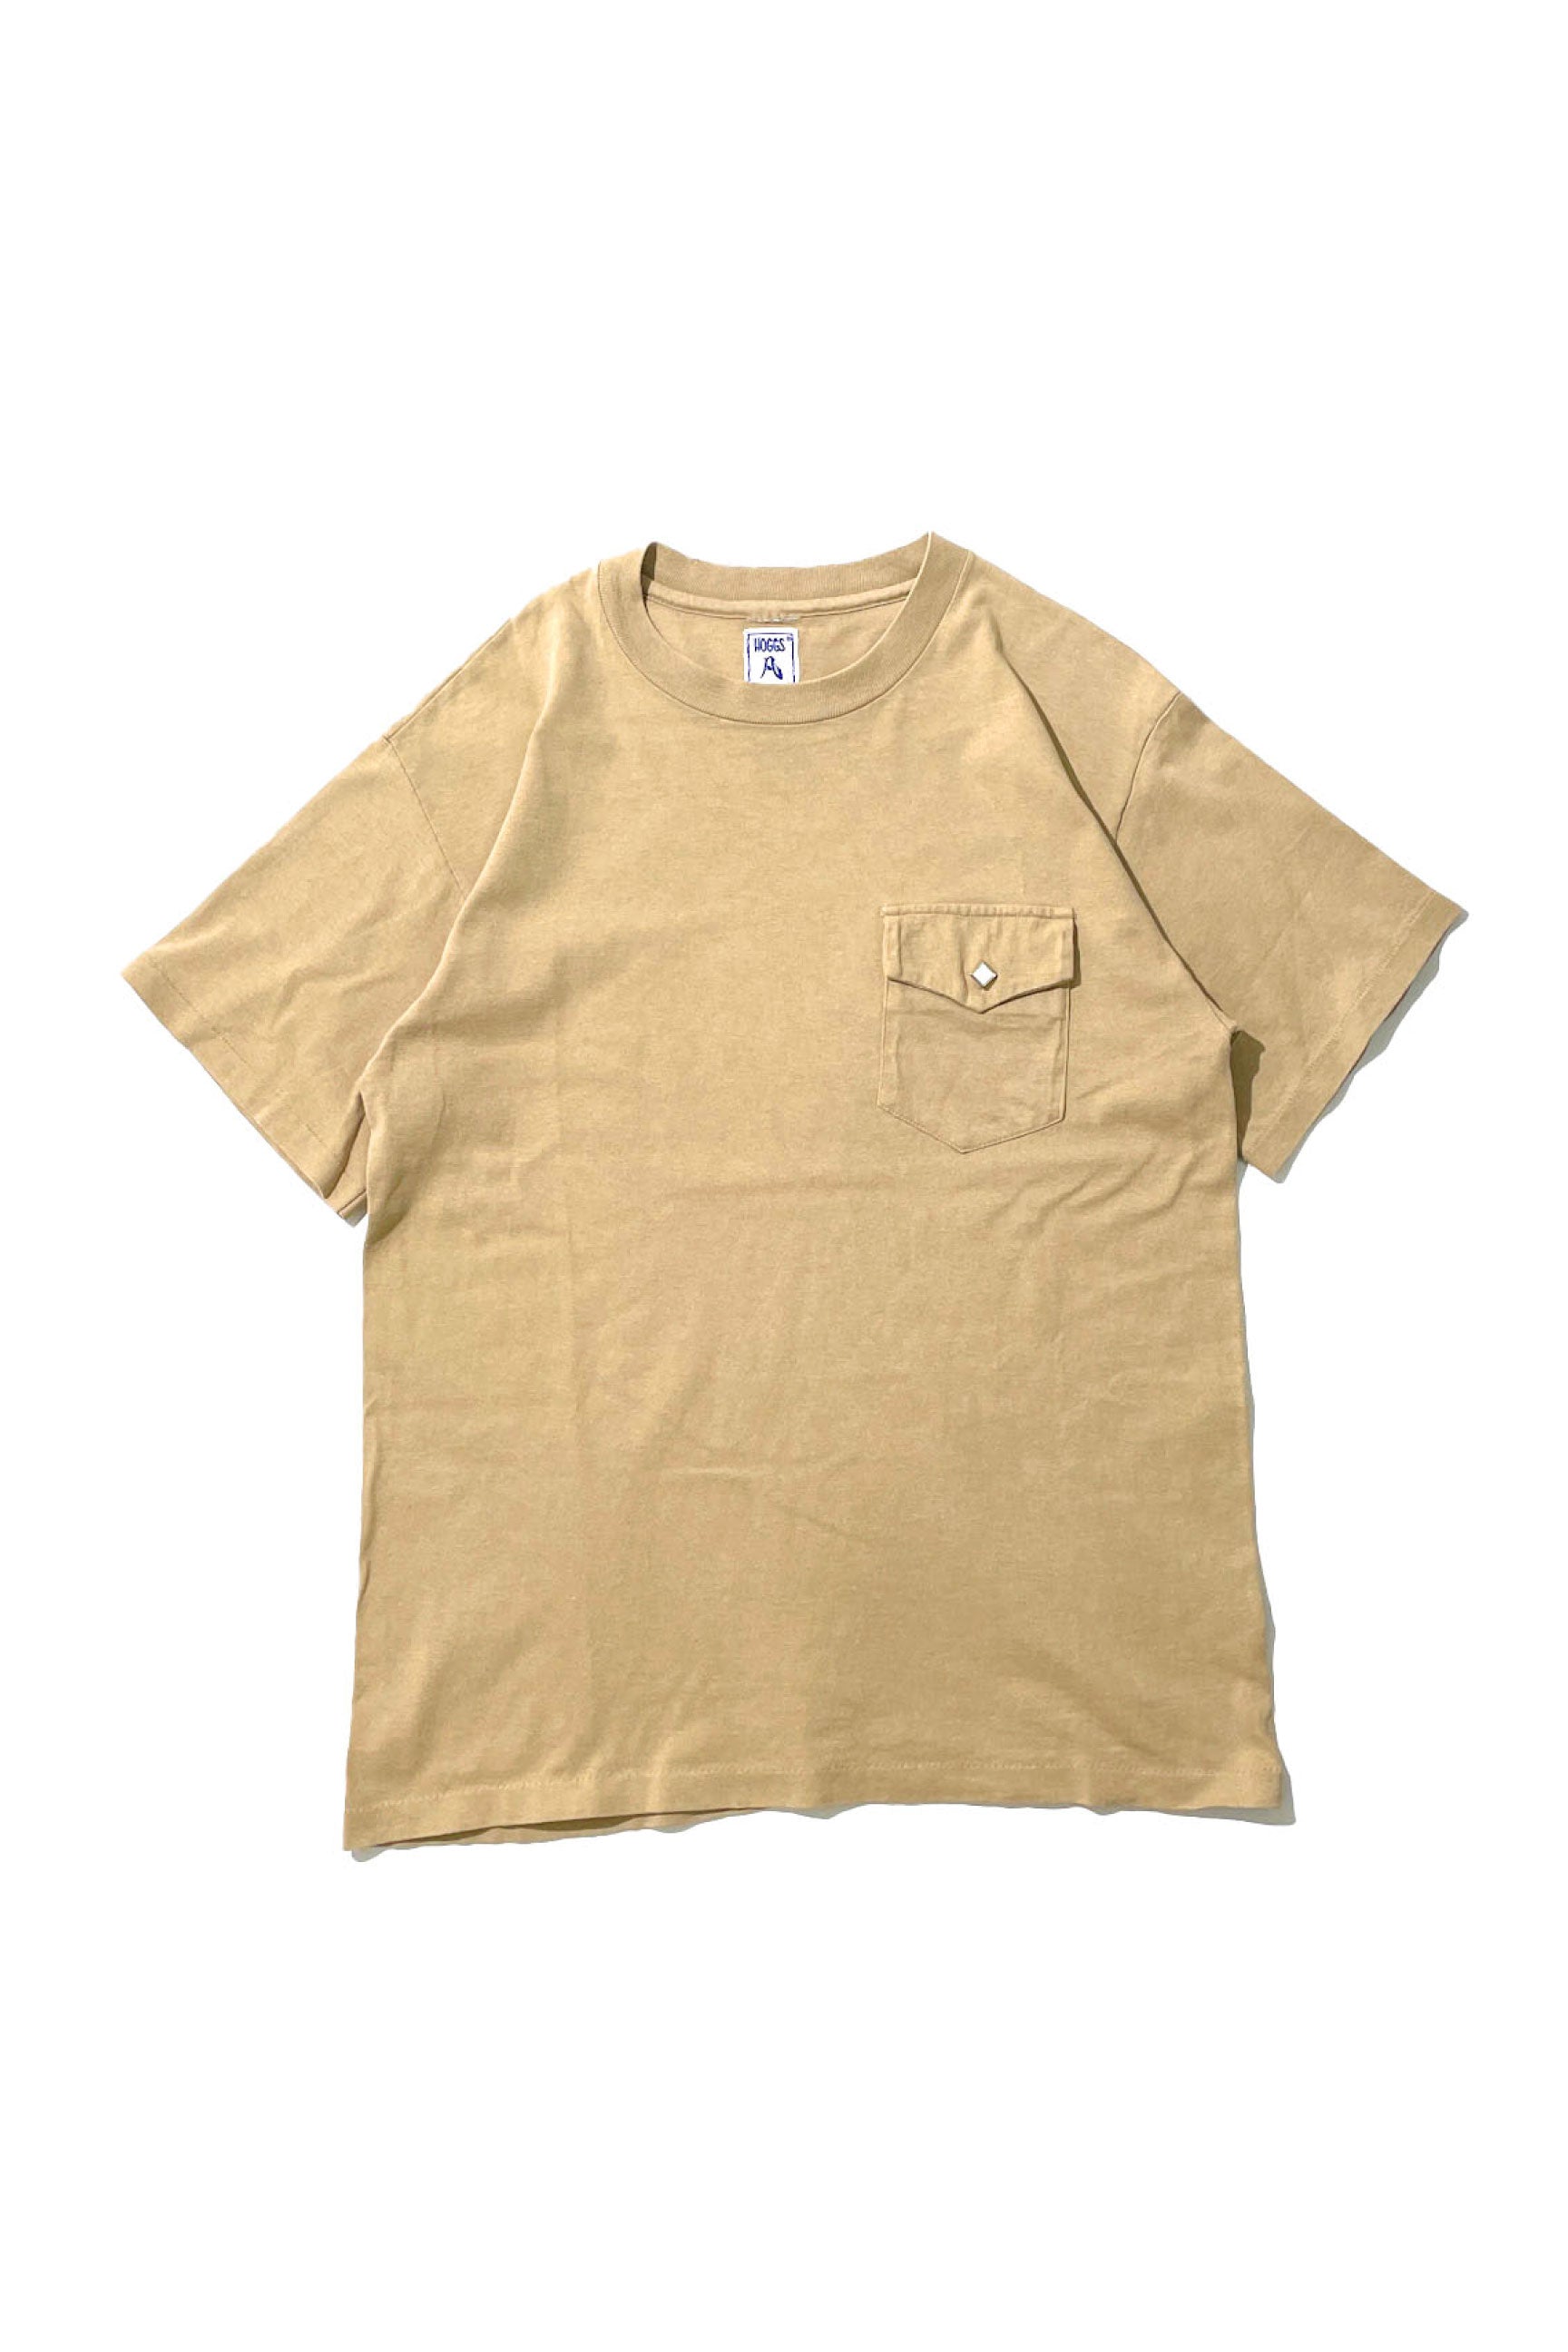 NEPENTHES HOGGS T-shirt – ReSCOUNT STORE